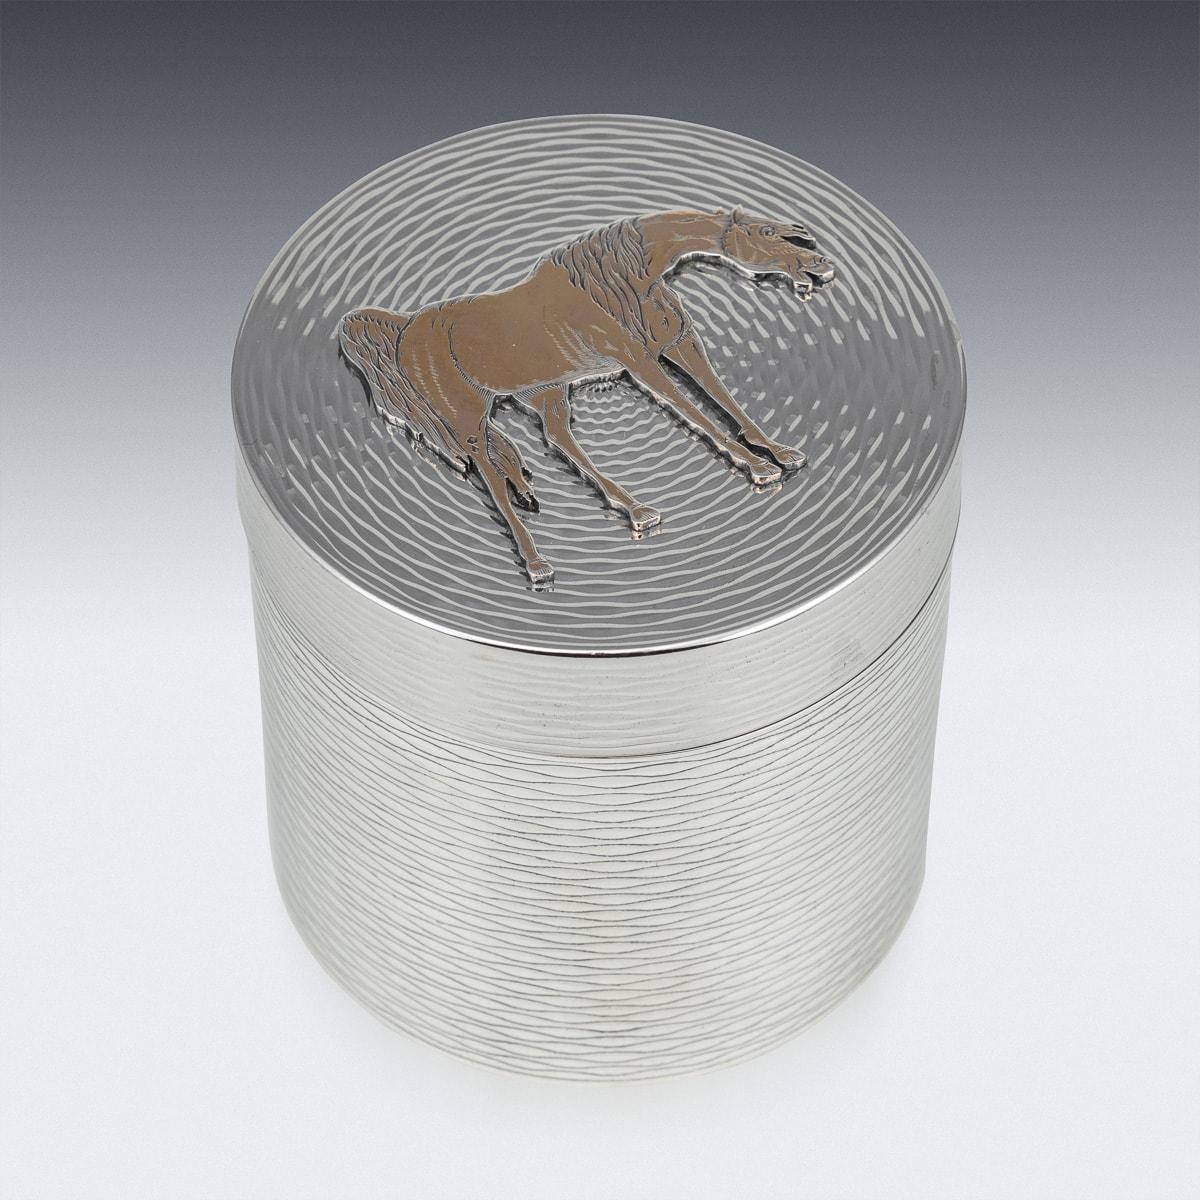 Hermes Solid Silver Cigarette Box & Matchbox With Gold Horse Detail c.1960 In Good Condition For Sale In Royal Tunbridge Wells, Kent